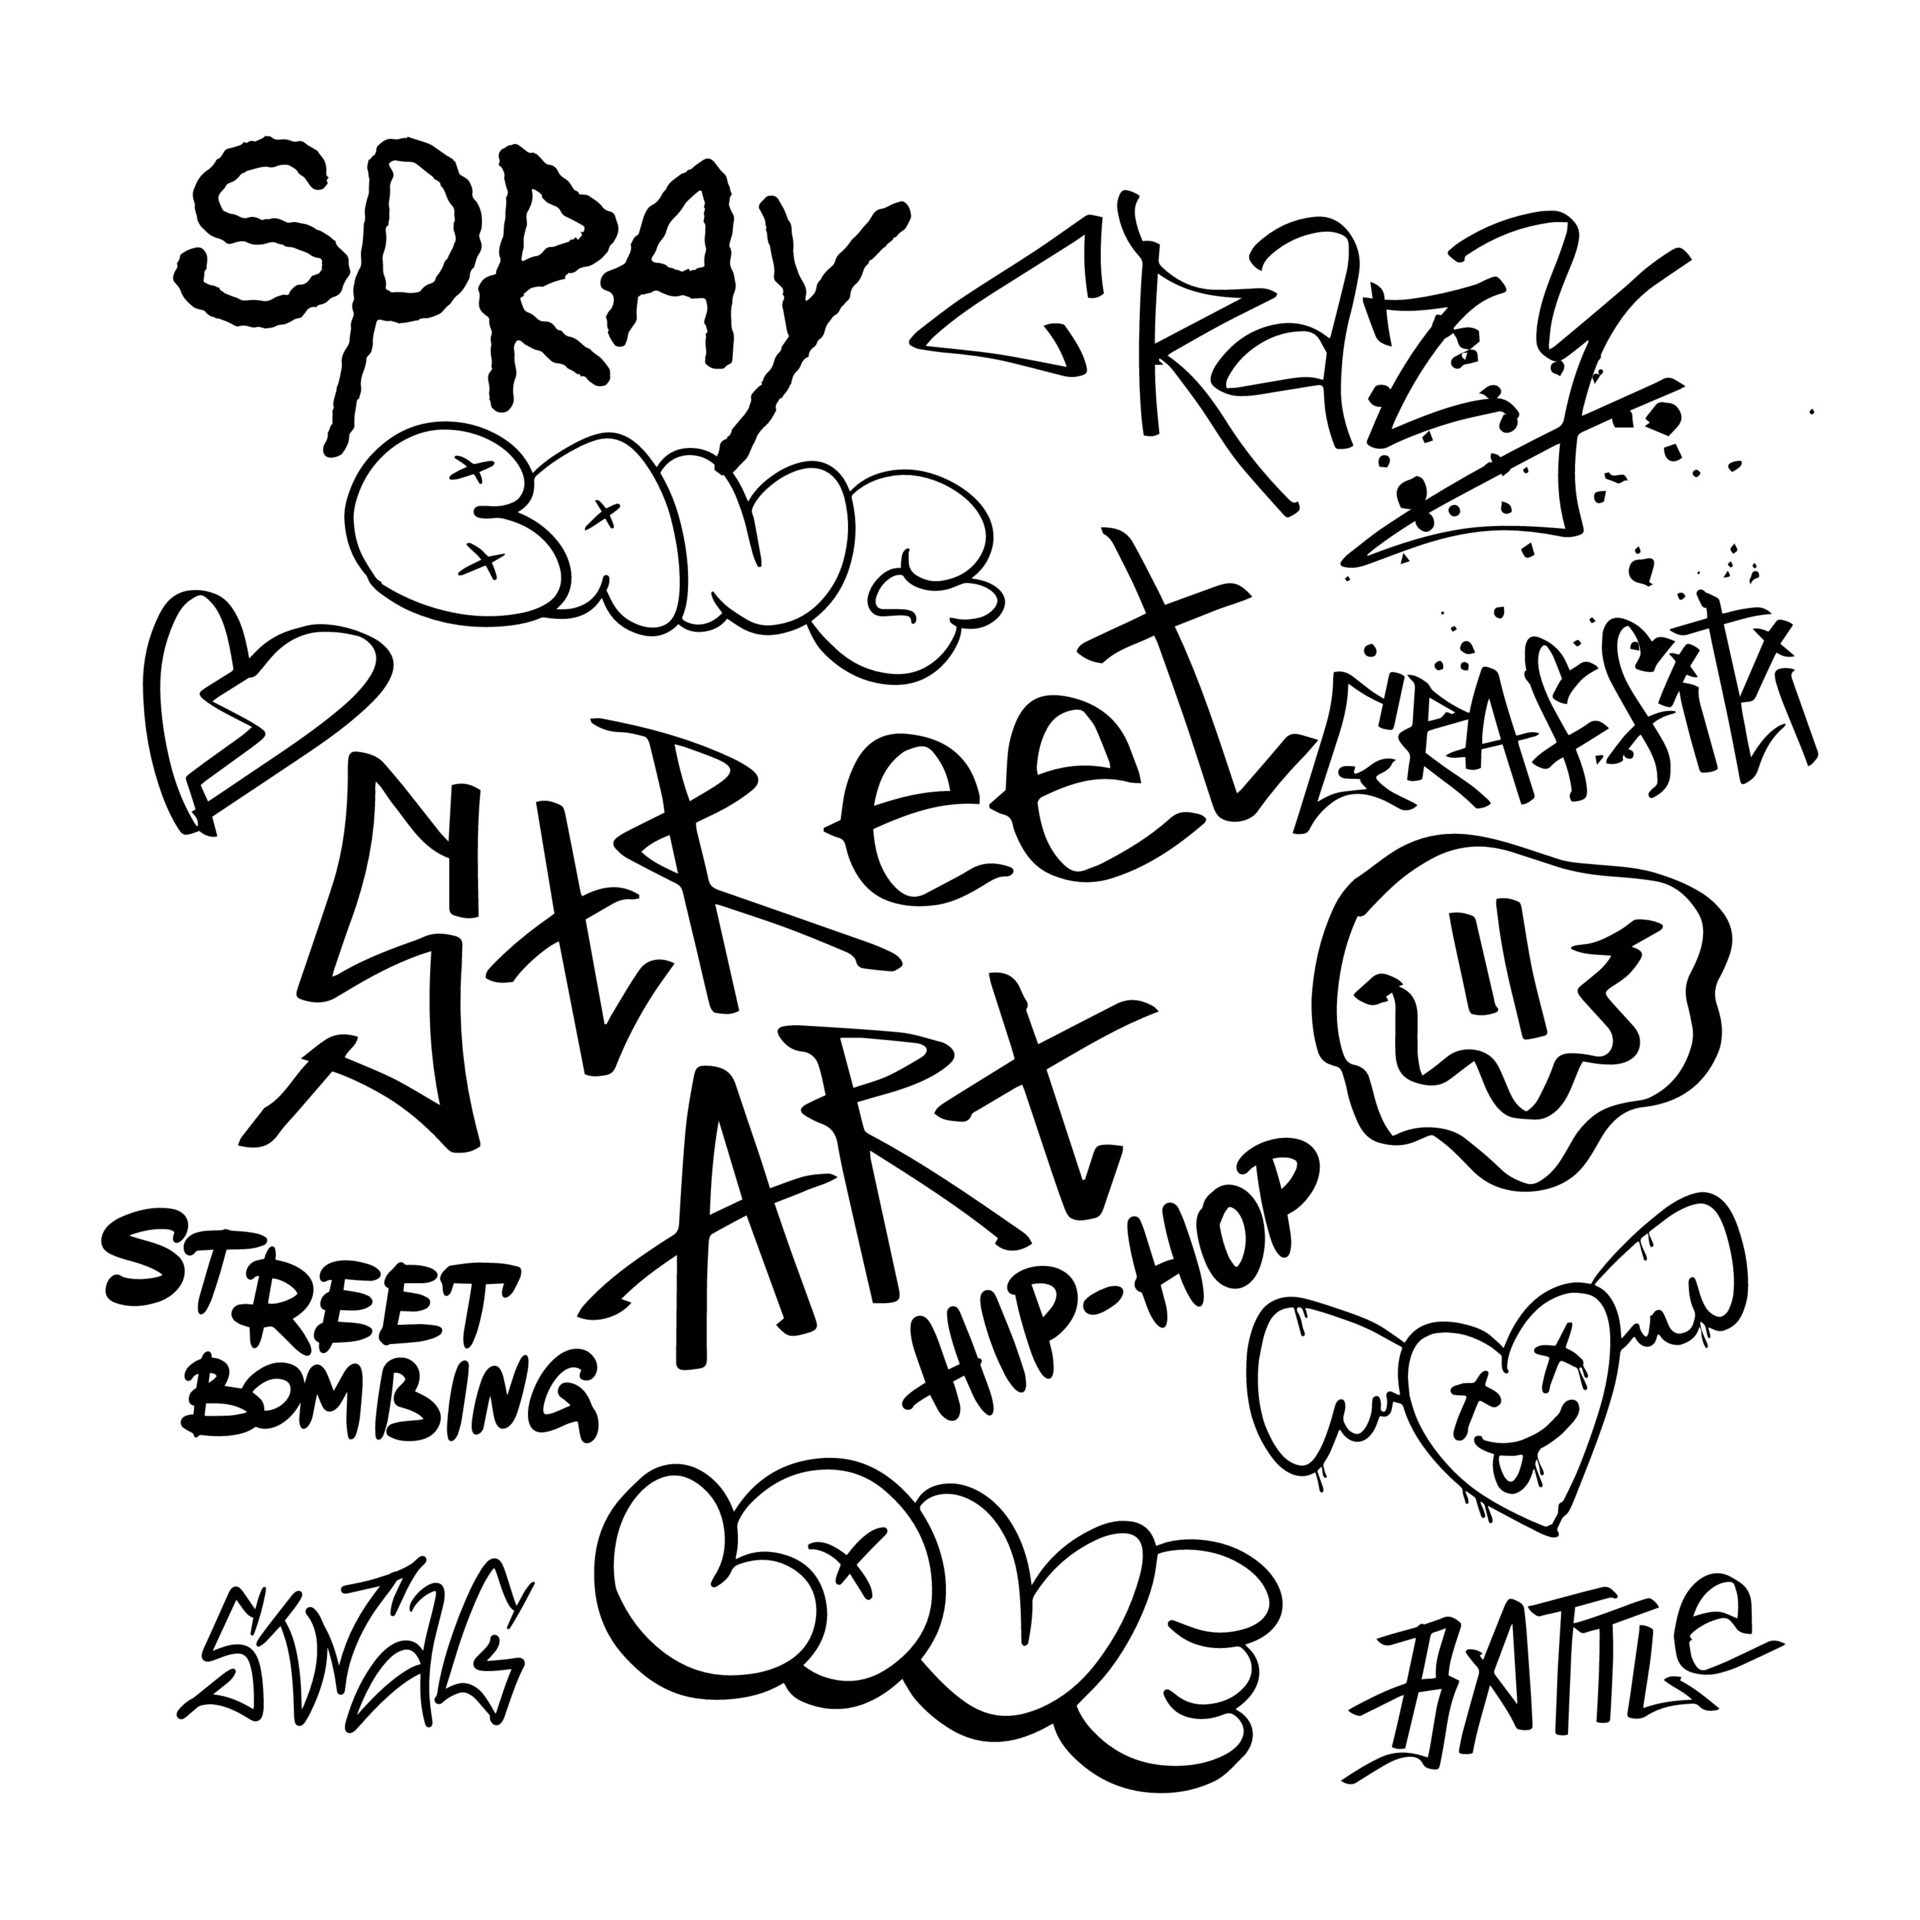 Street black graffiti lettering elements in the grunge style with tags a  white background . Urban savage spray paint art. Set creative vector design  teenage for tee t shirt or sweatshirt. 28212368